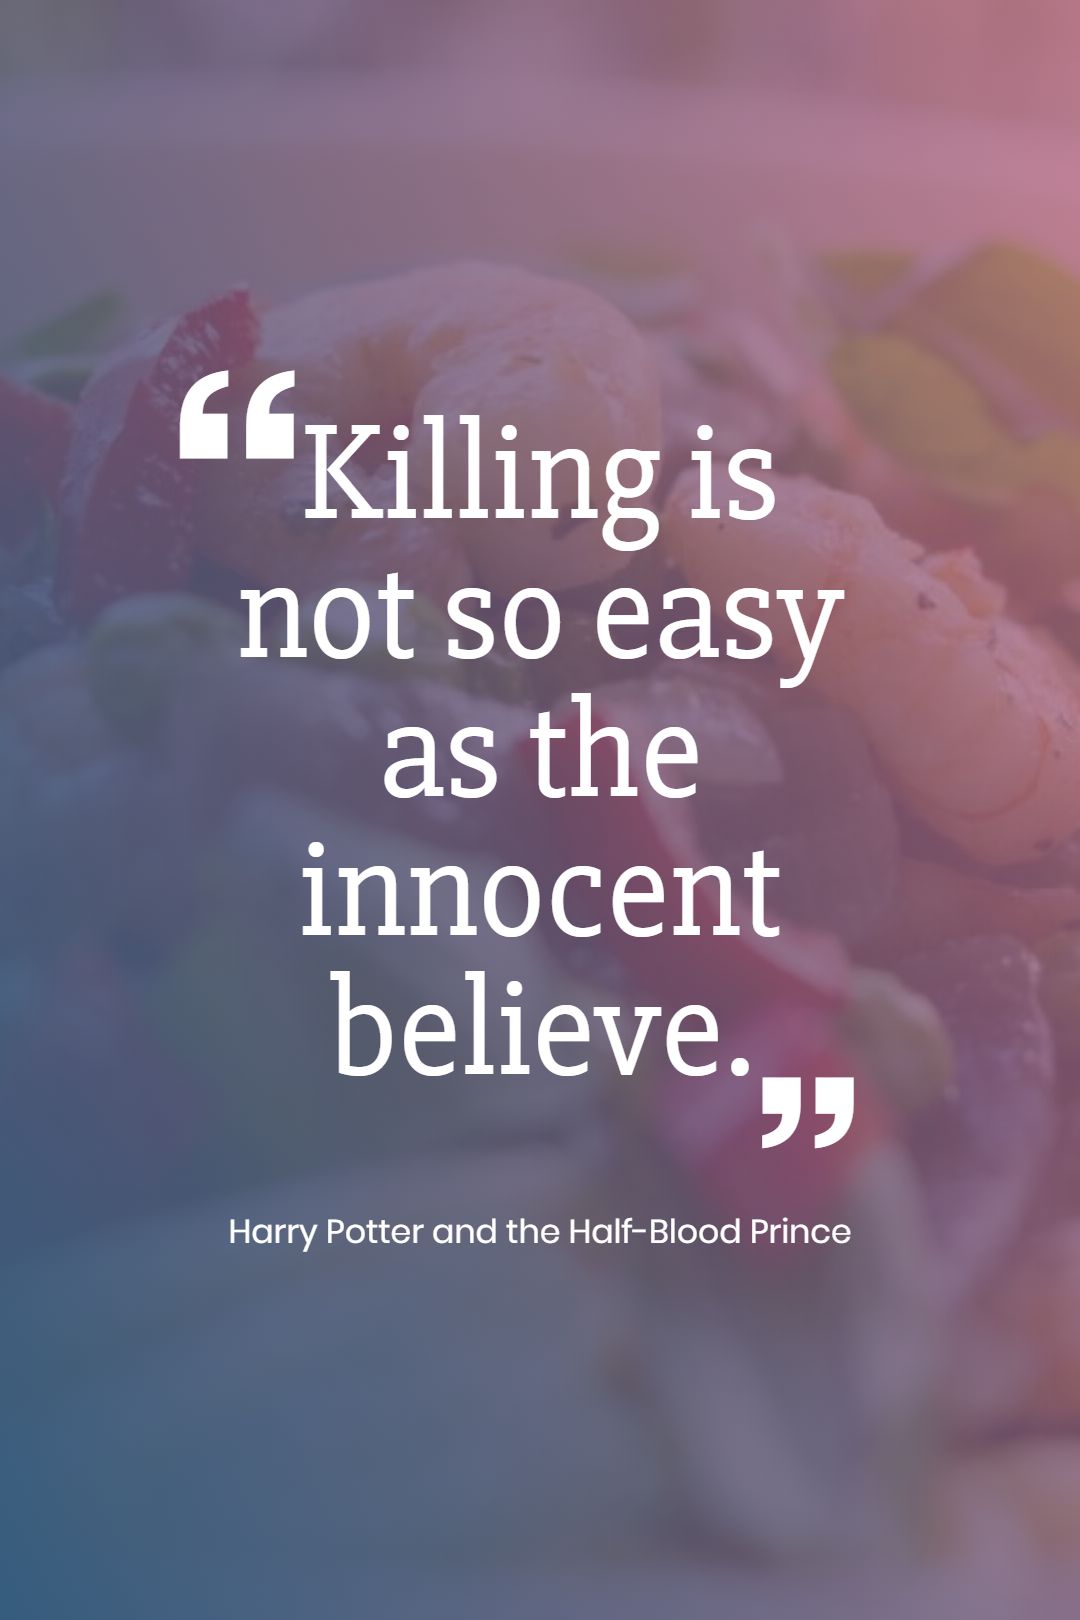 Killing is not so easy as the innocent believe.